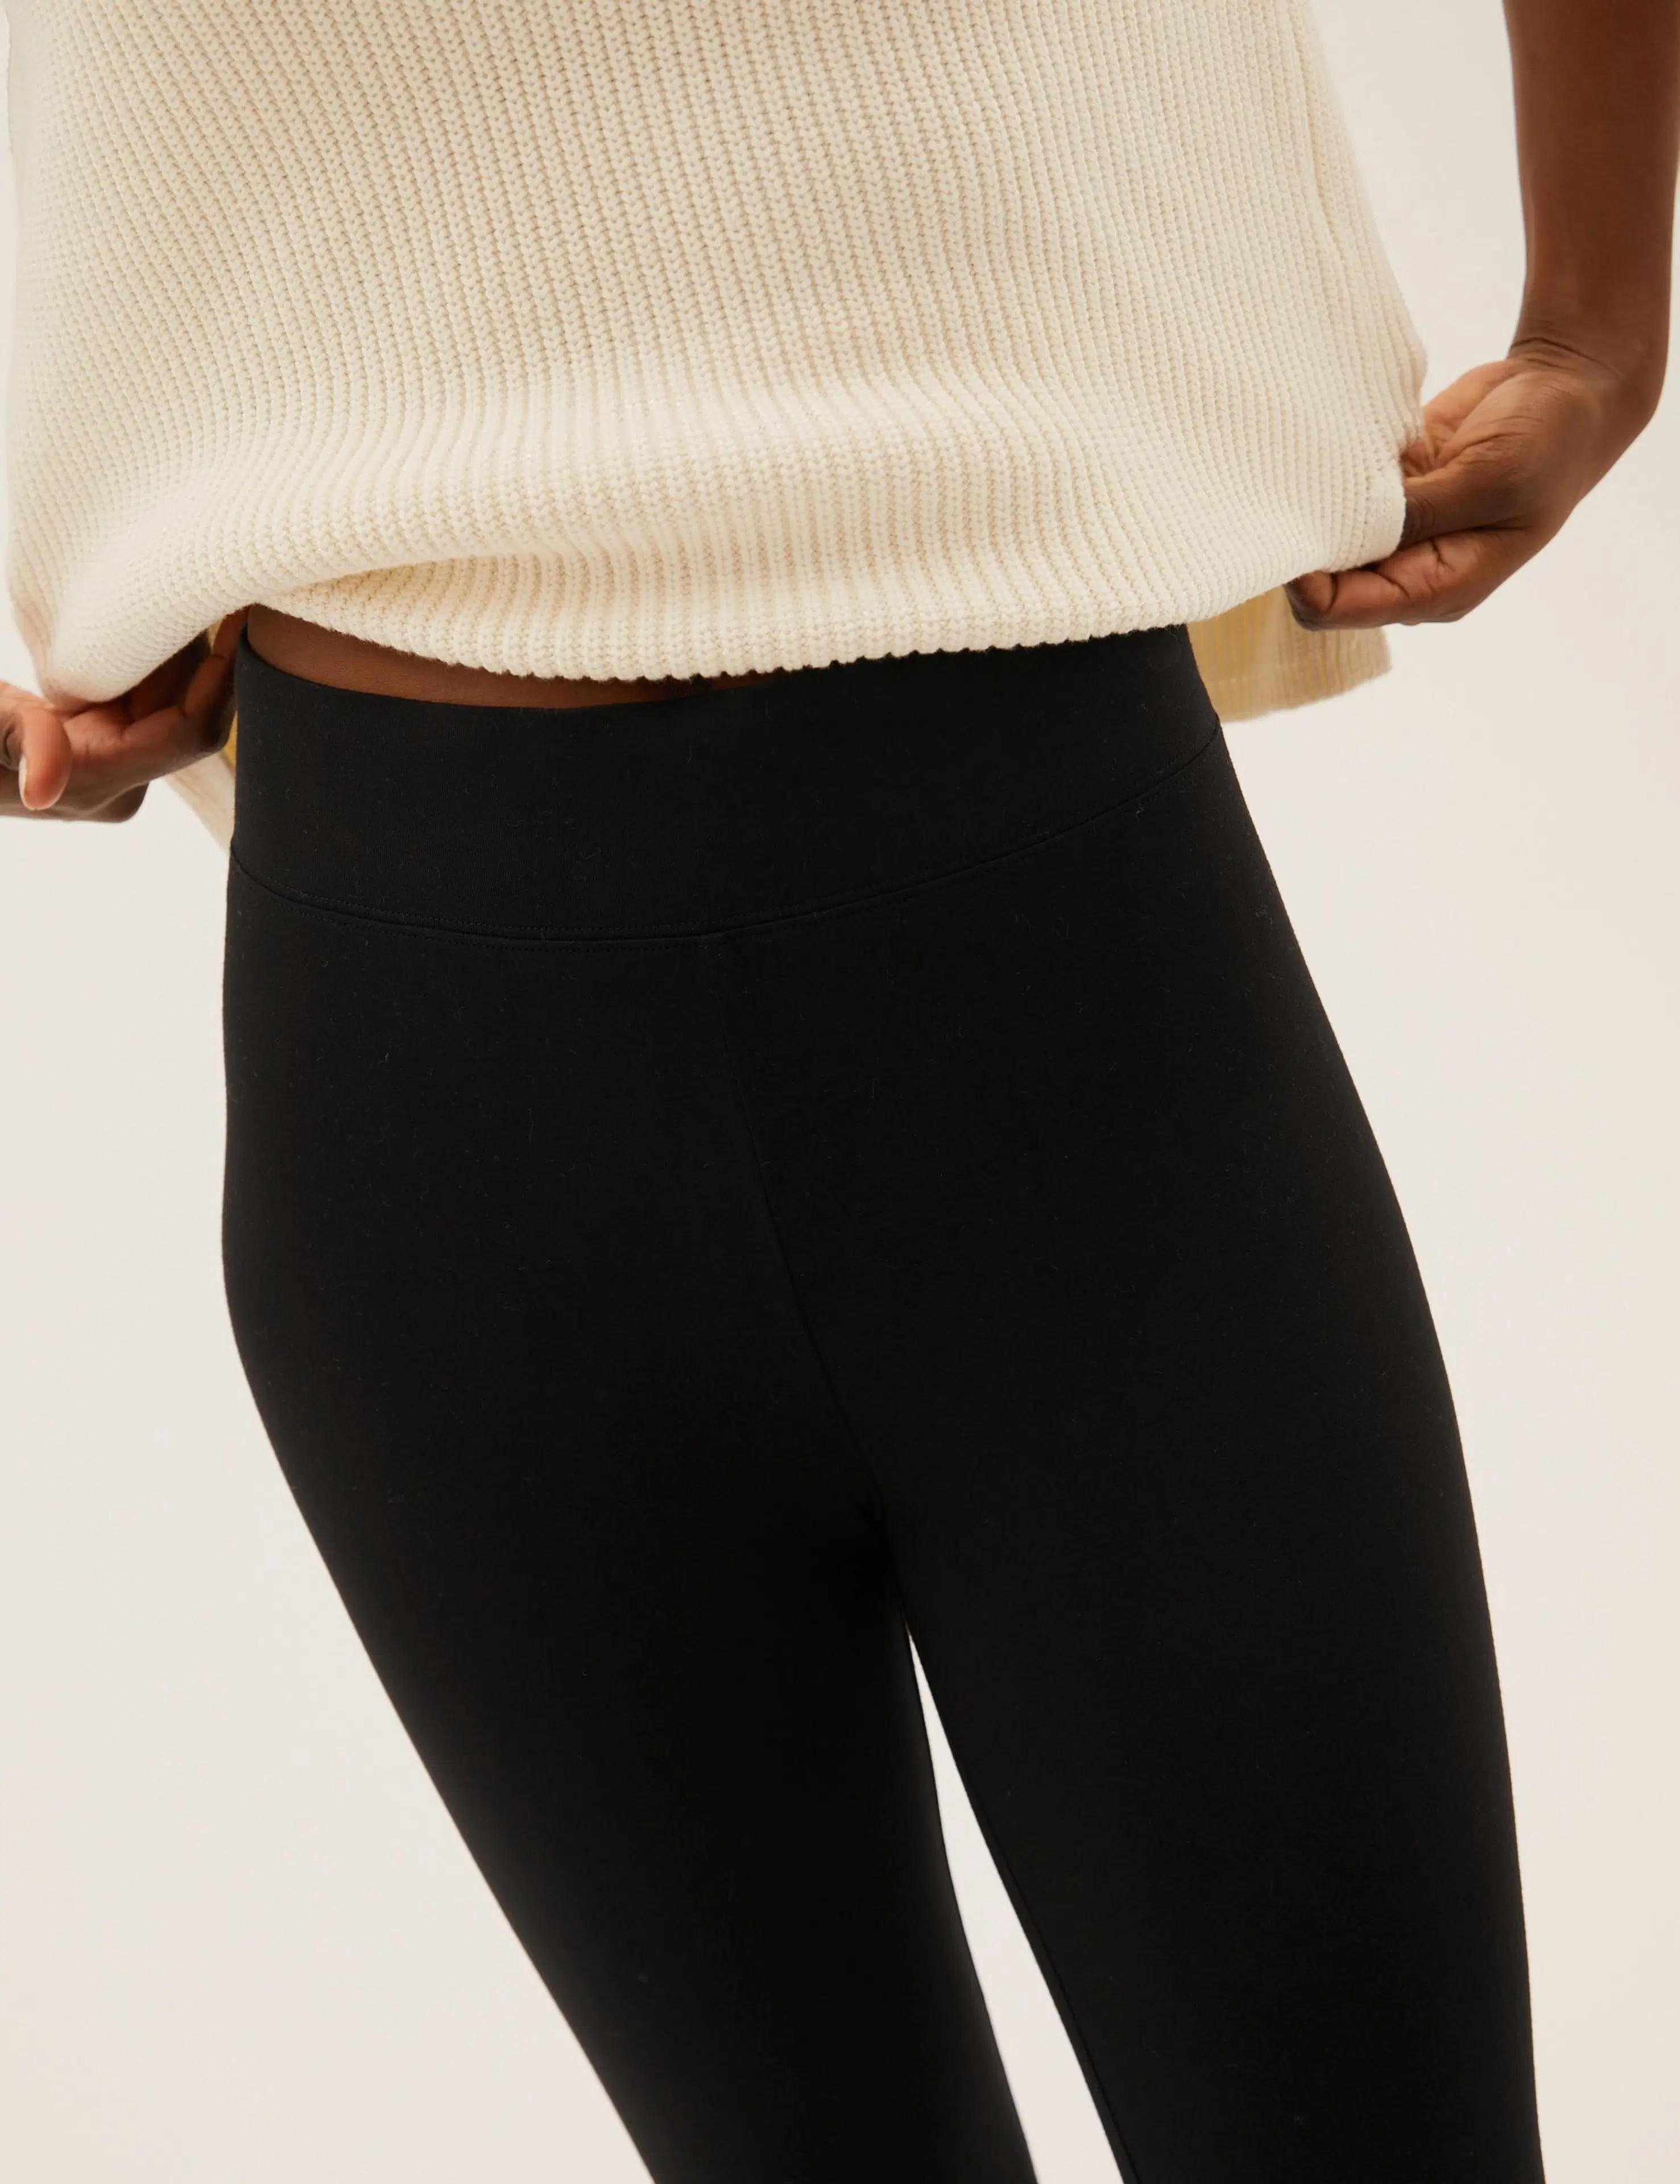 M&S High waisted cropped leggings